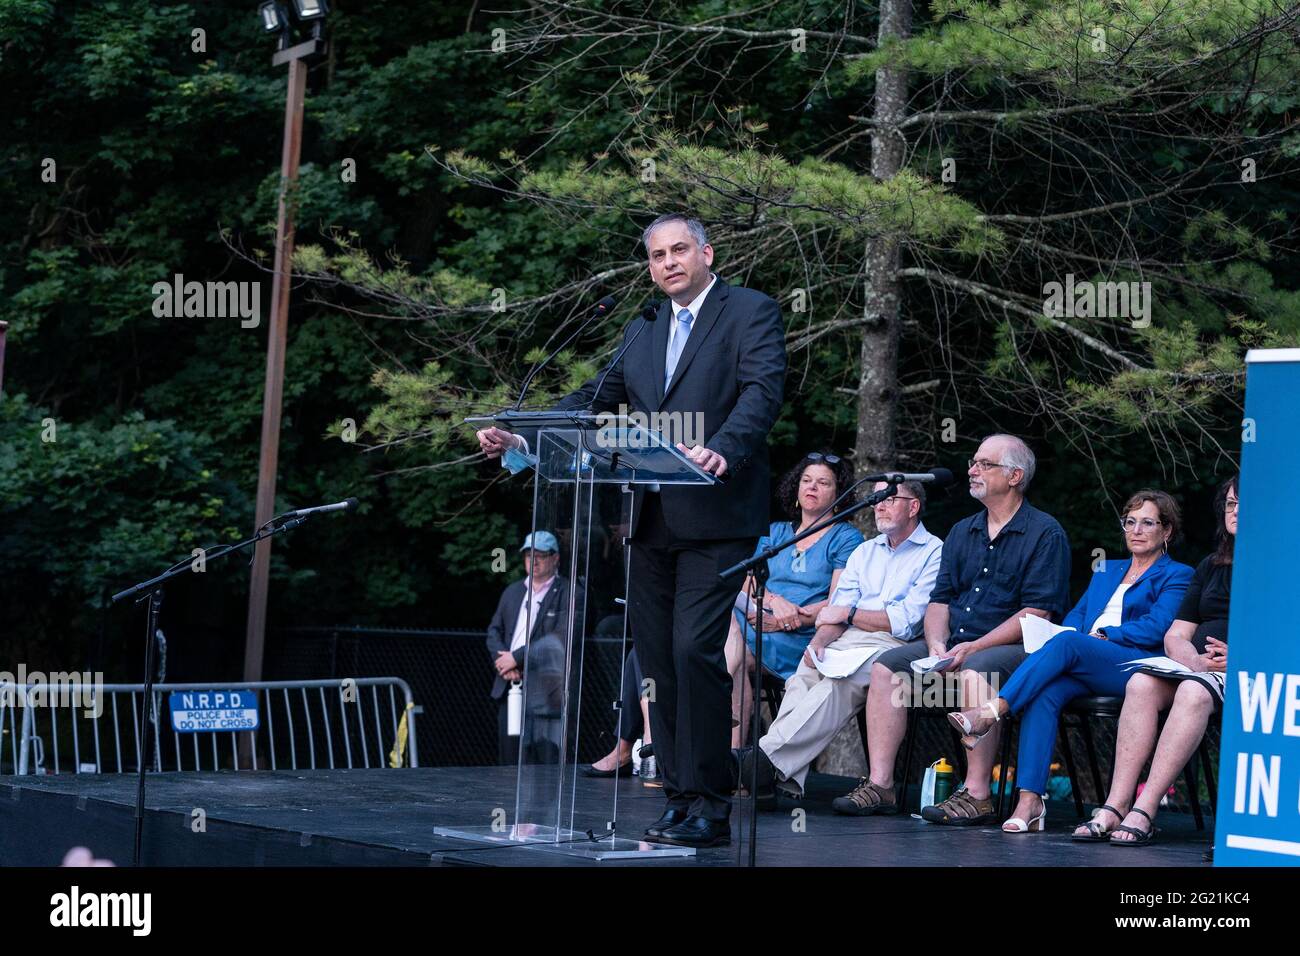 Scarsdale, United States. 07th June, 2021. Acting New York Israeli Consul General​ Israel Nitzan speaks at Westchester stands united against anti-semitism and hate rally at Jewish Community Center of Mid-Westchester in Scarsdale, NY on June 7, 2021. (Photo by Lev Radin/Sipa USA) Credit: Sipa USA/Alamy Live News Stock Photo